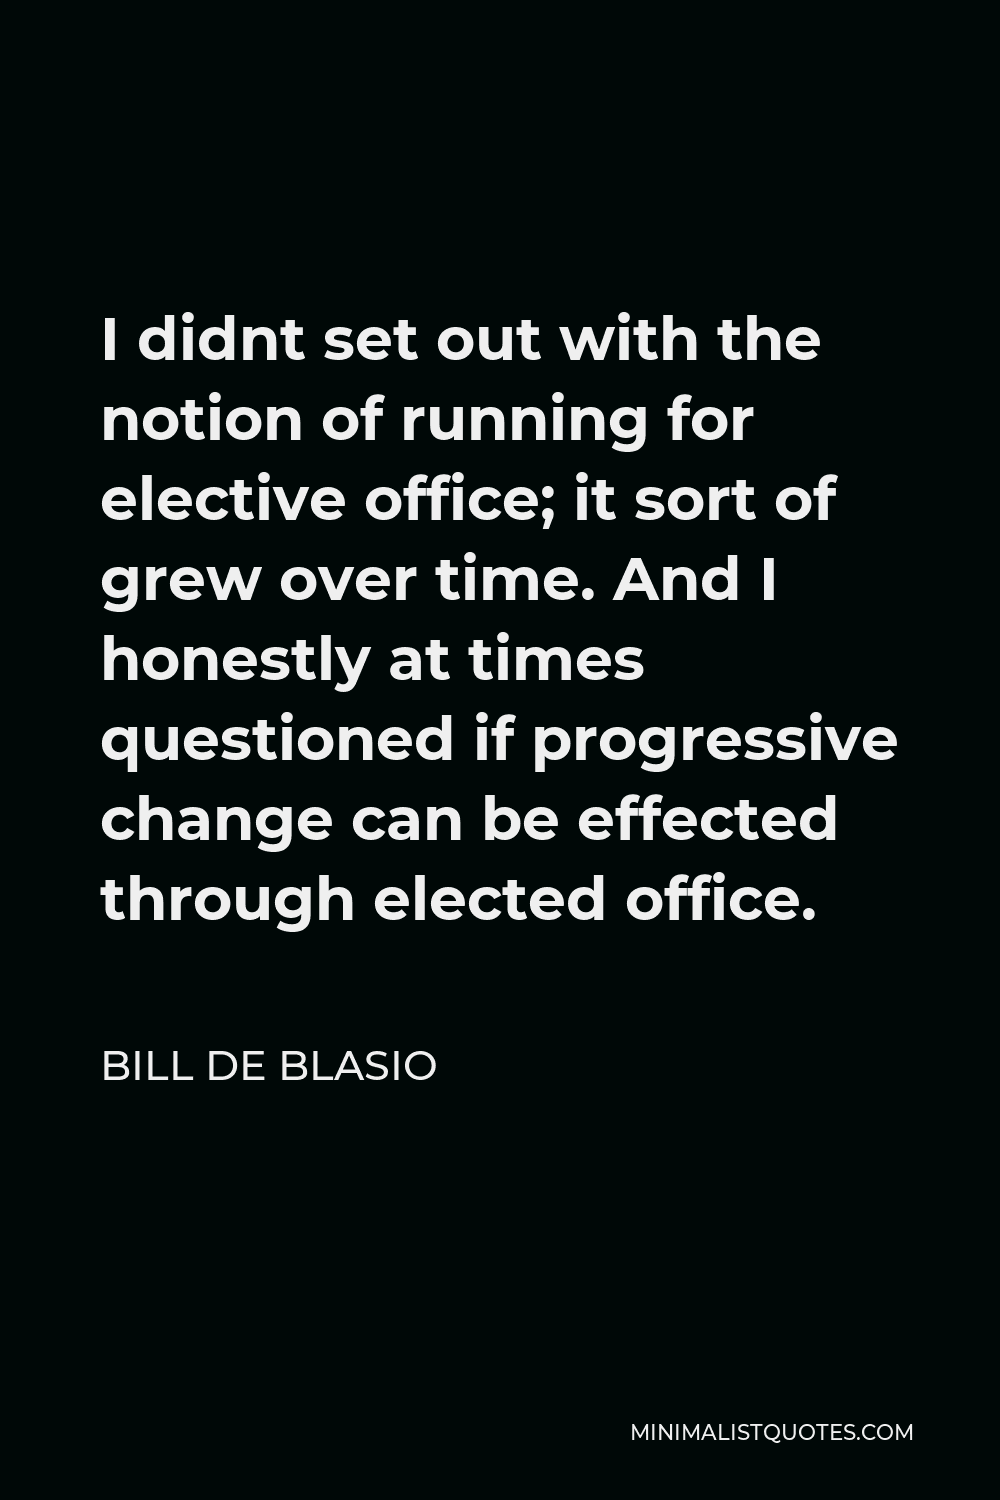 Bill de Blasio Quote - I didnt set out with the notion of running for elective office; it sort of grew over time. And I honestly at times questioned if progressive change can be effected through elected office.